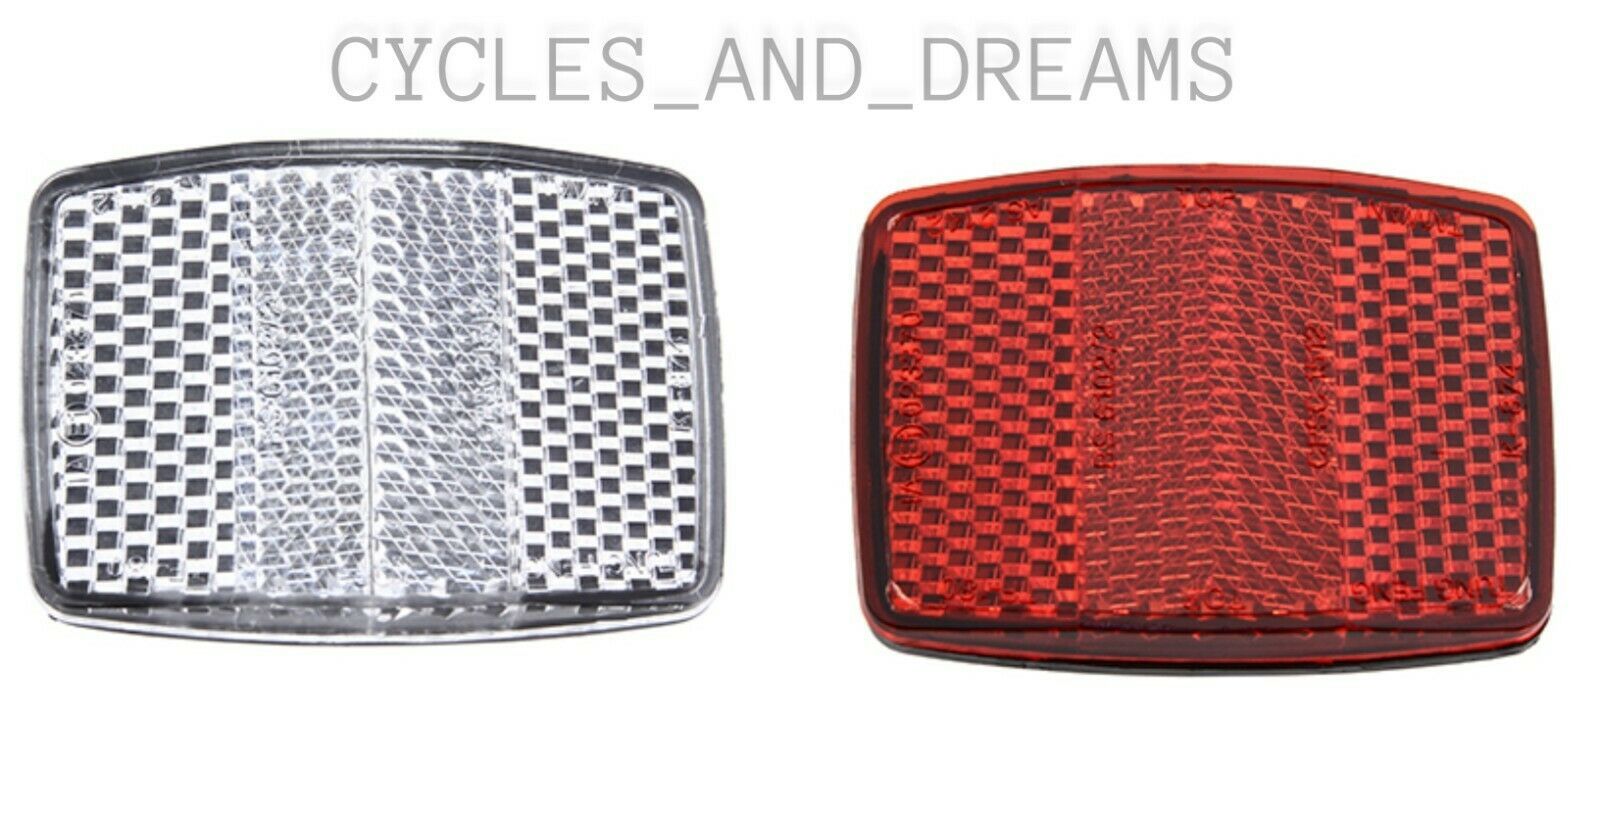 Primary image for PREMIUM Clear Front Reflector OR Red Rear Reflector TF-180, BIKE PARTS REFLECTOR